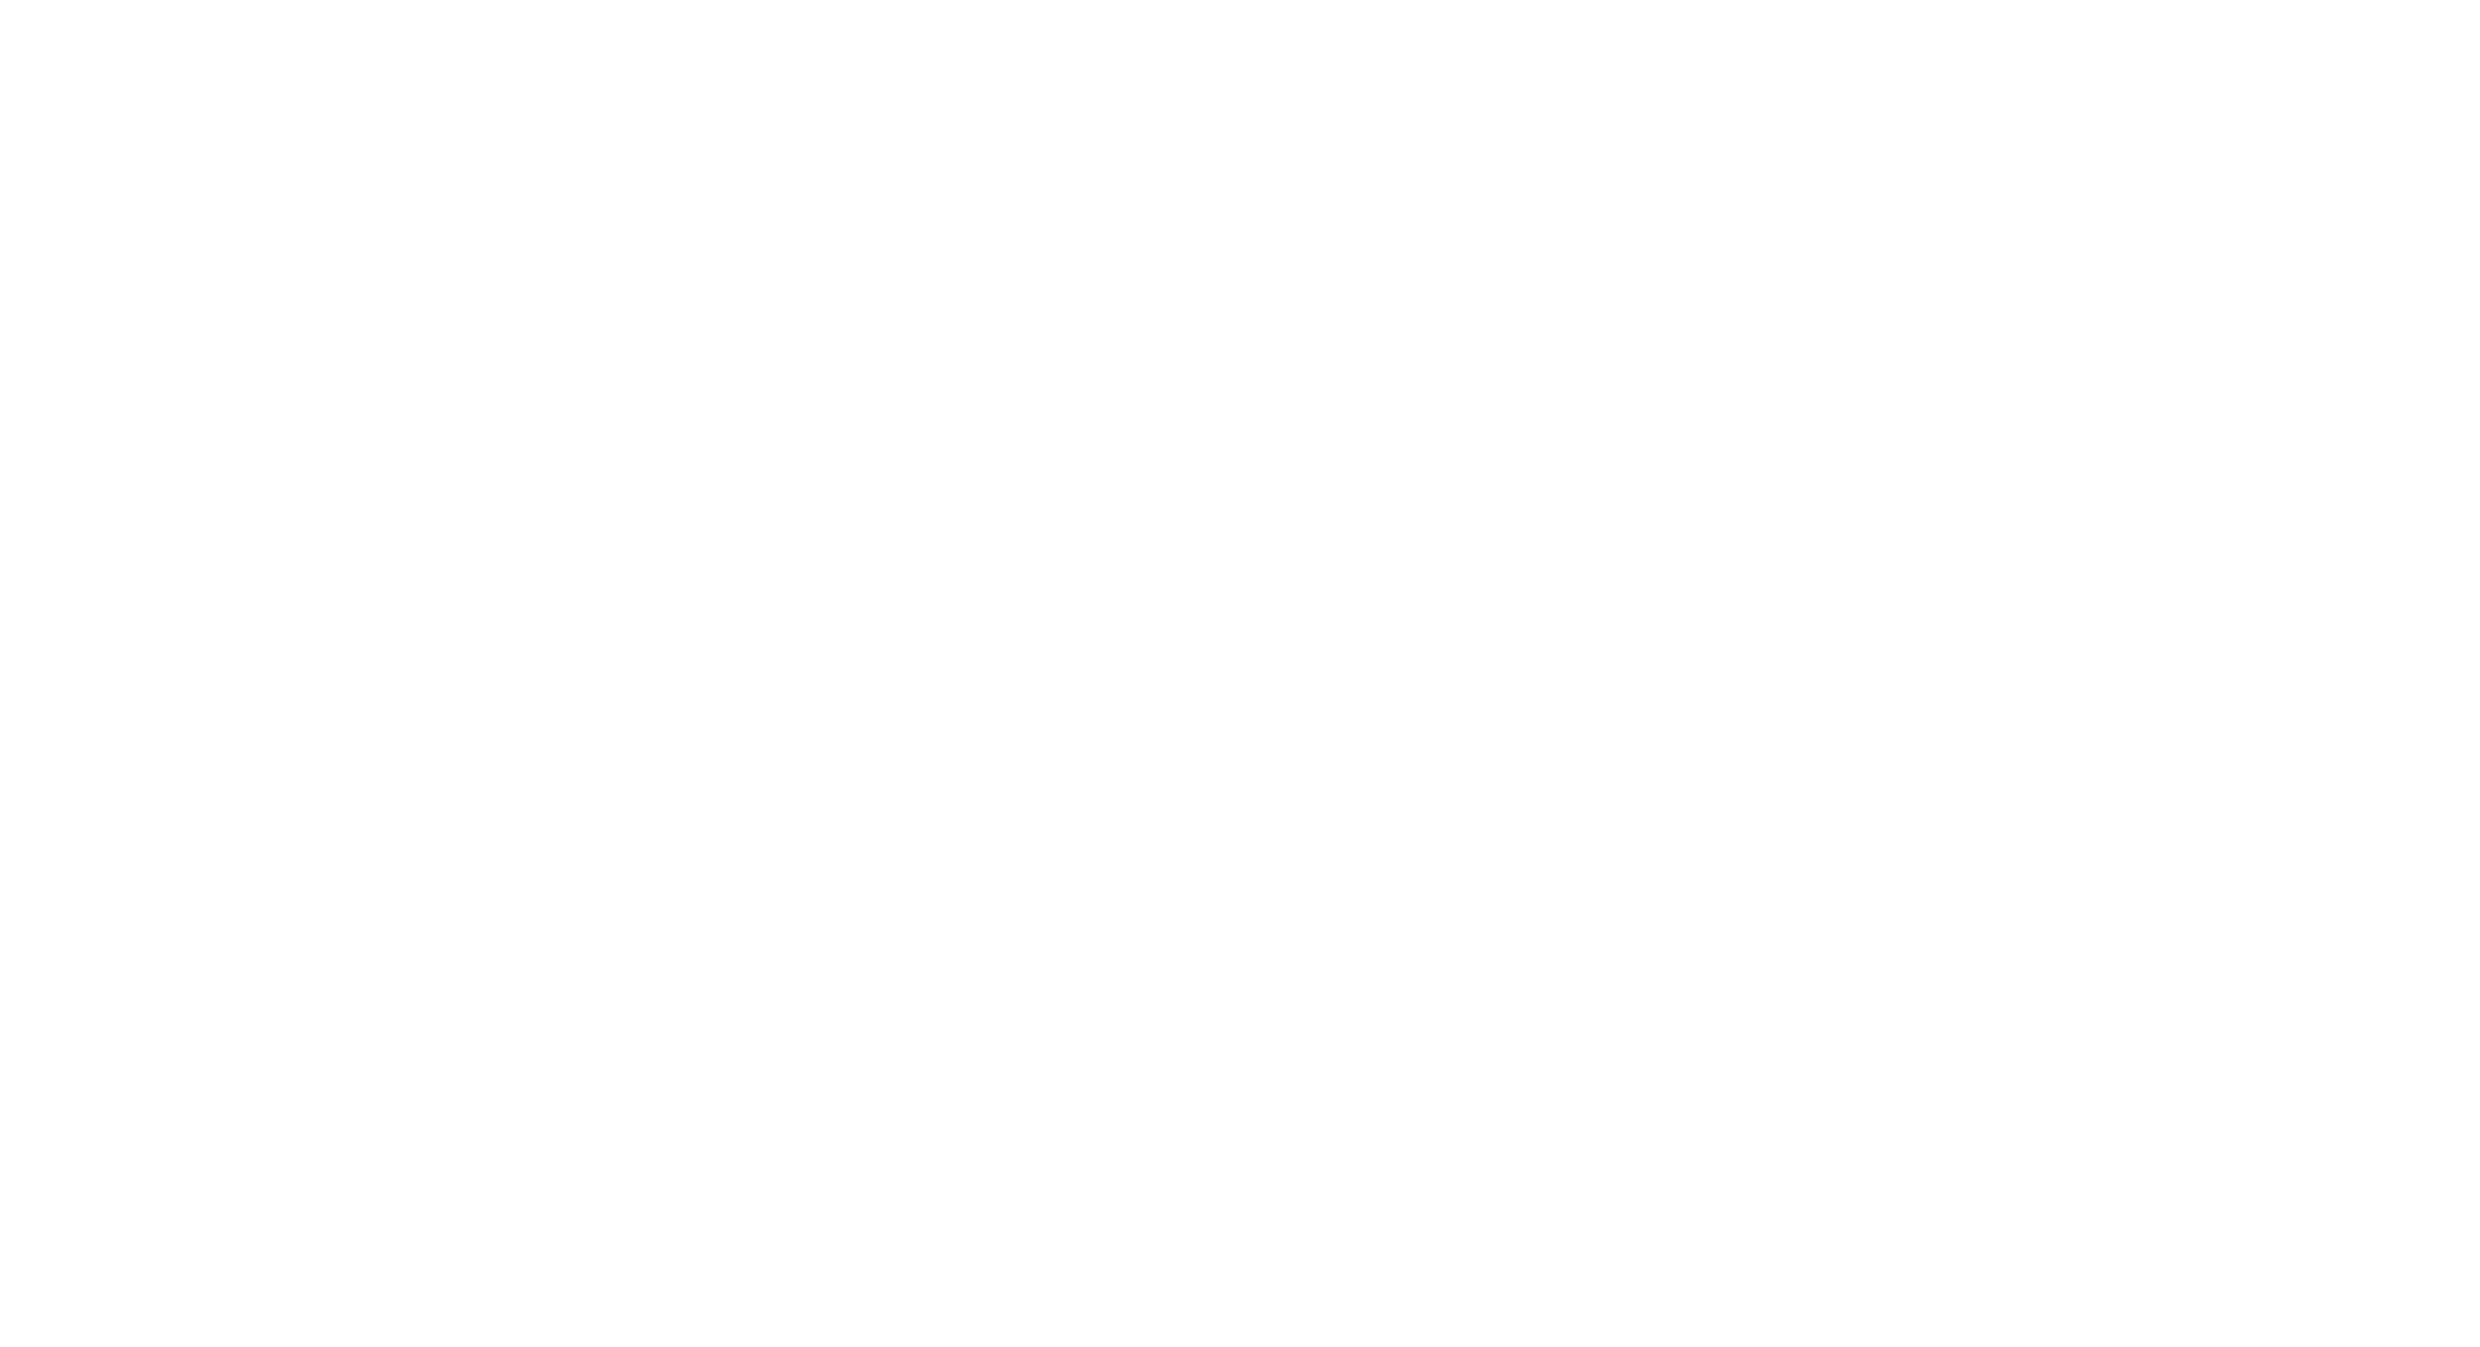 Oltremare News